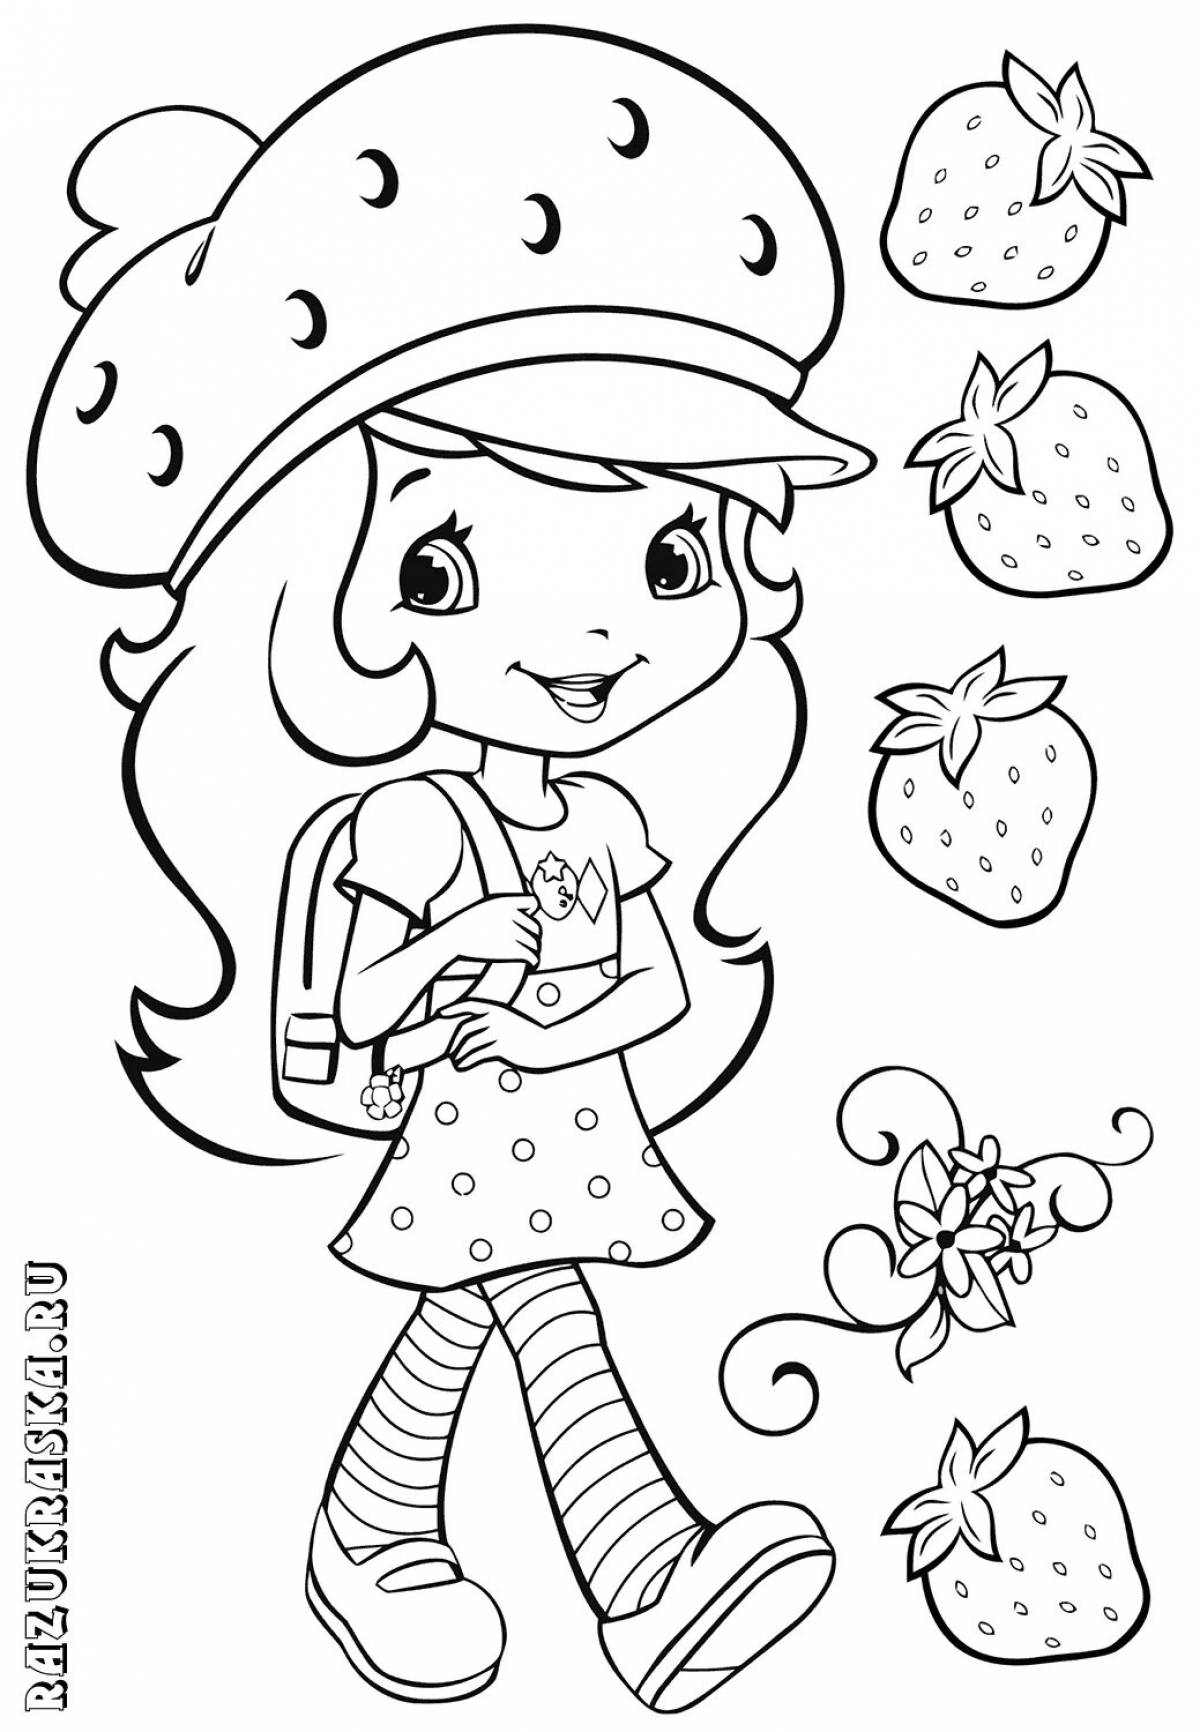 Inspirational strawberry coloring book